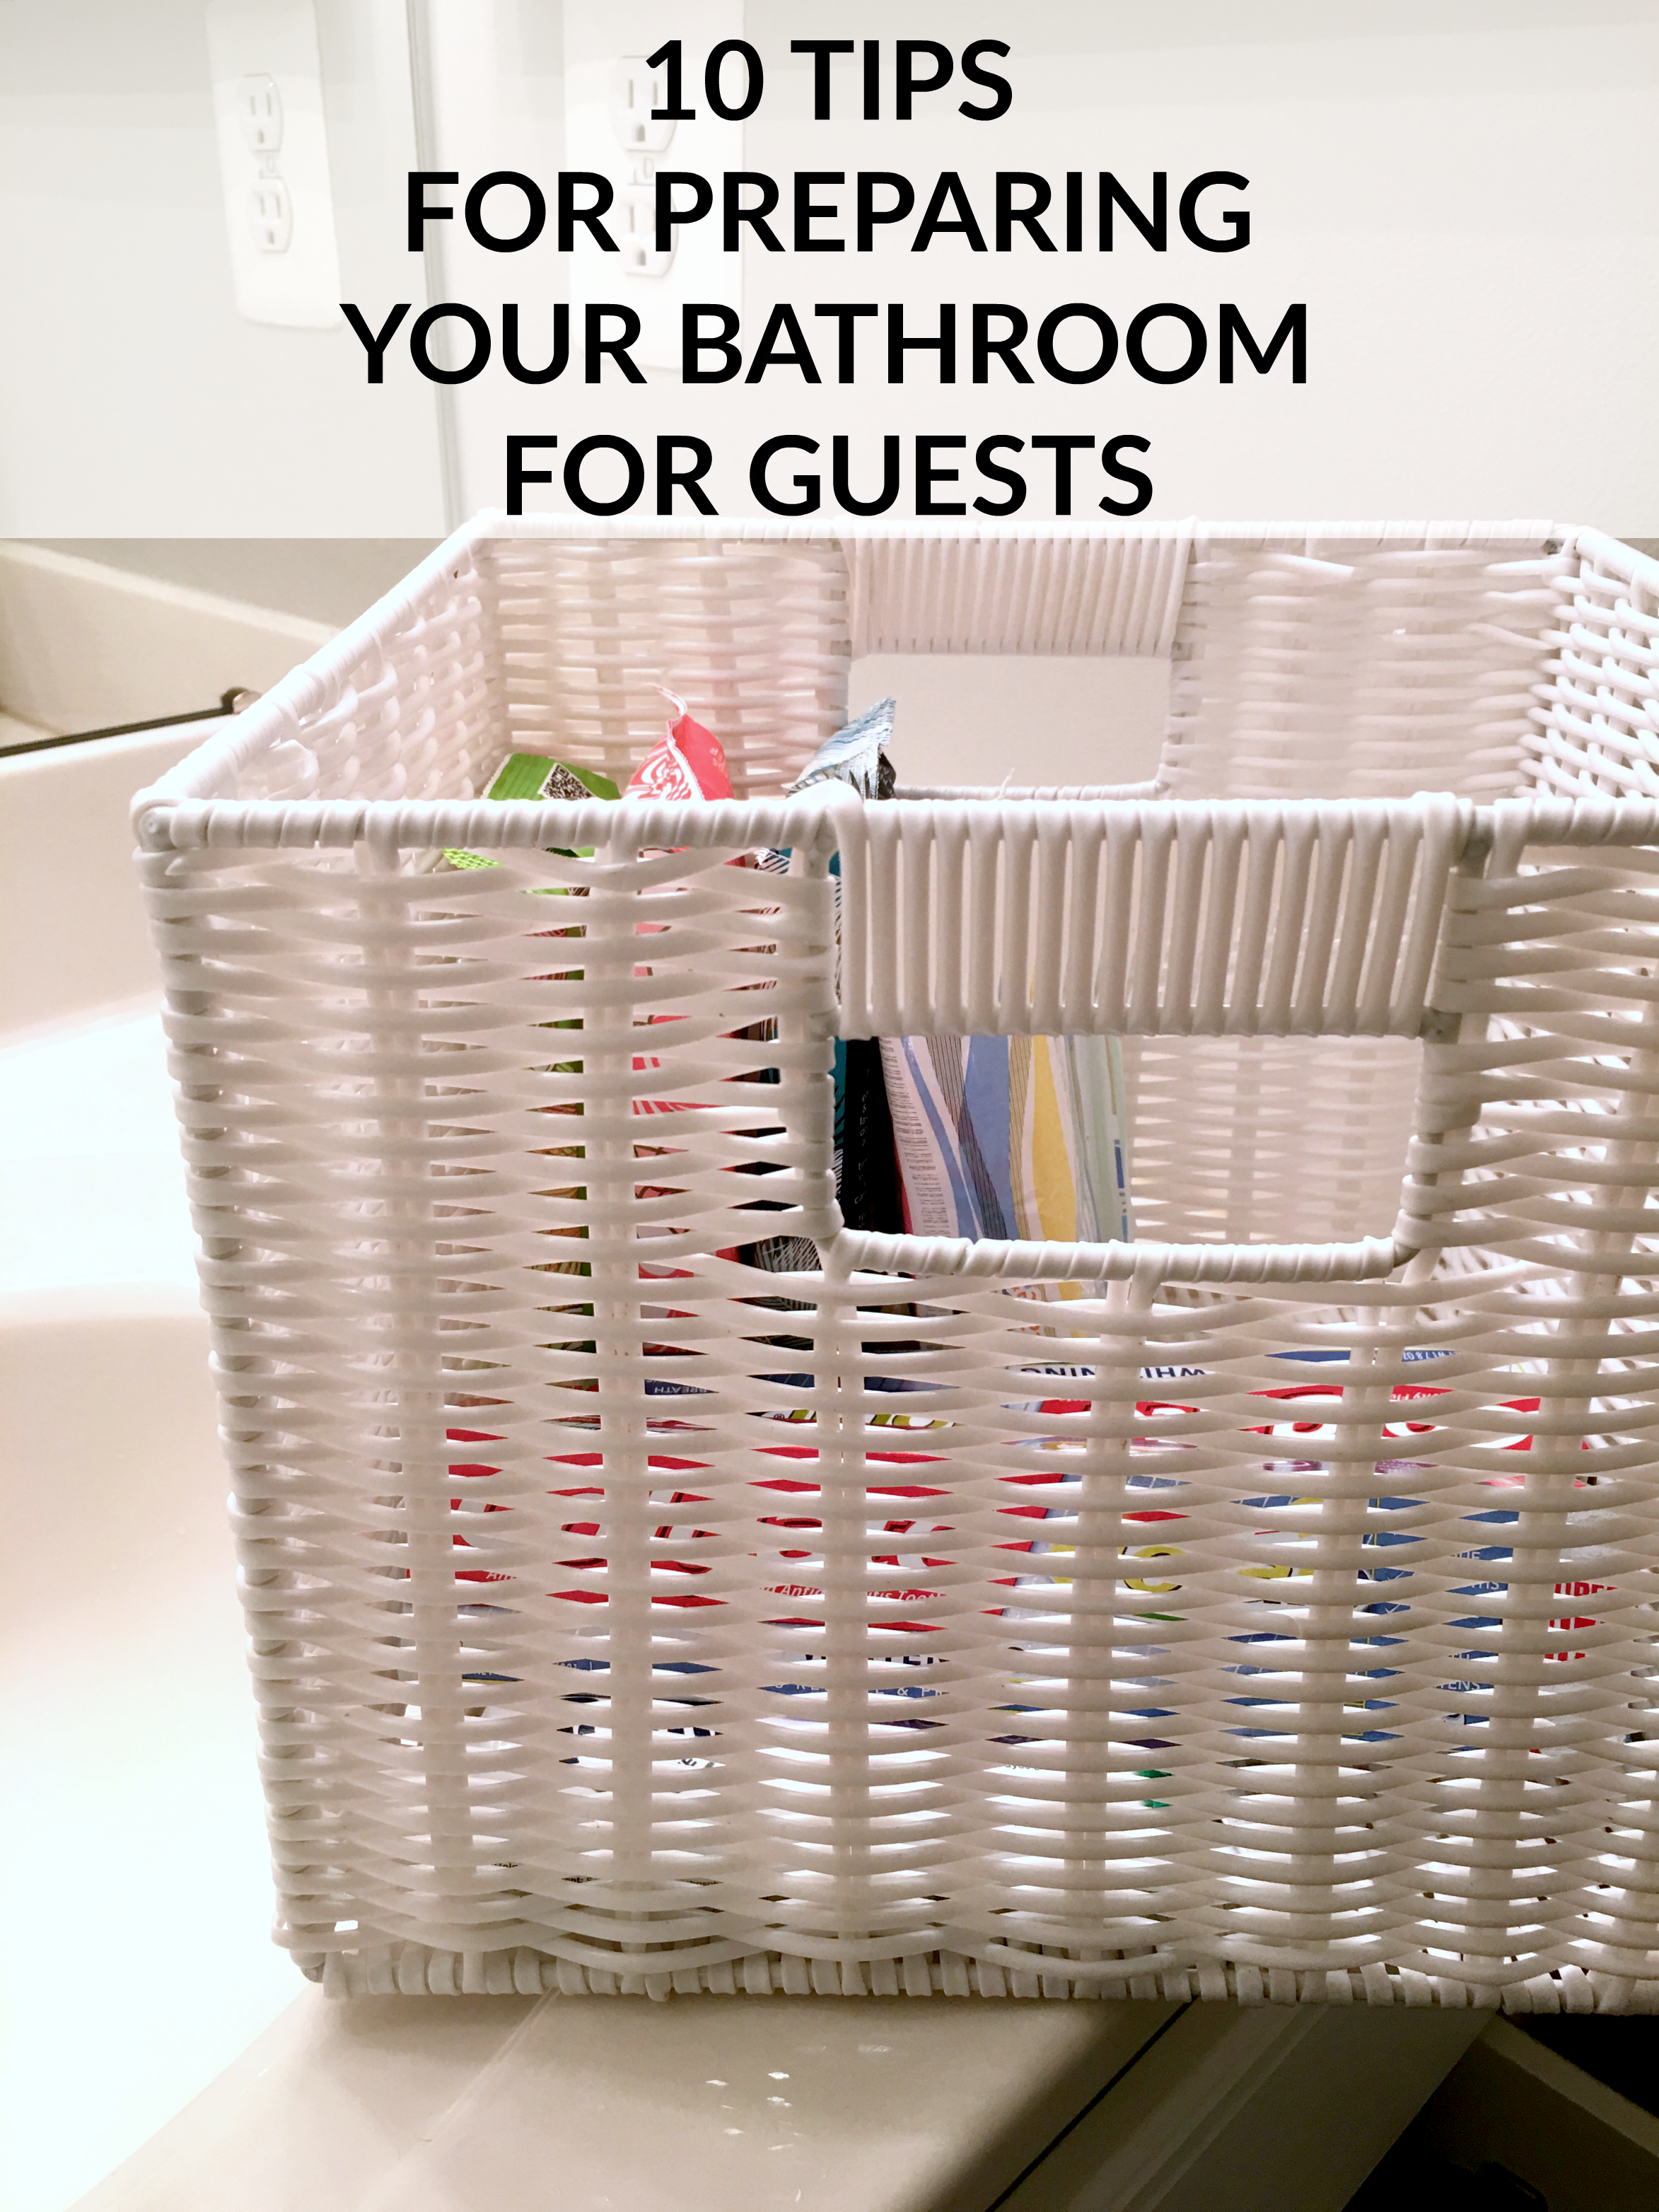 Tips for Preparing Your Bathroom for Guests